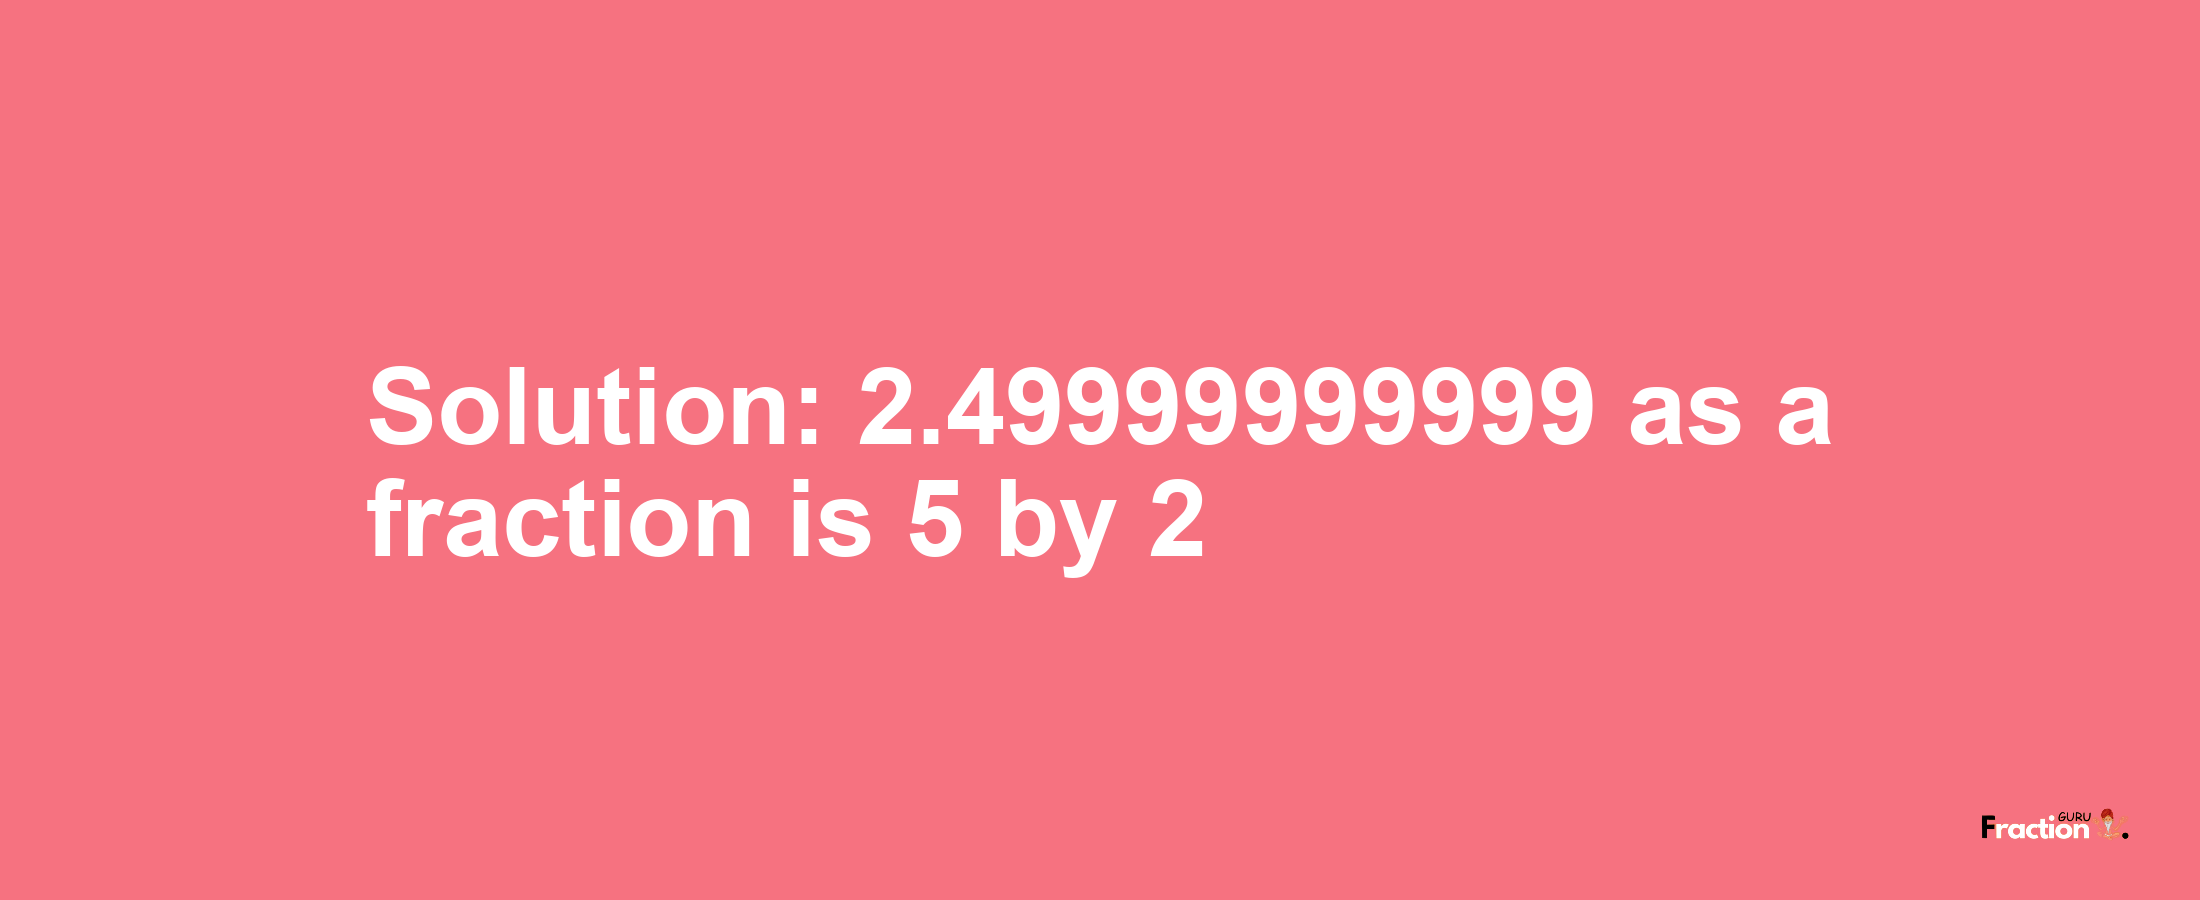 Solution:2.49999999999 as a fraction is 5/2